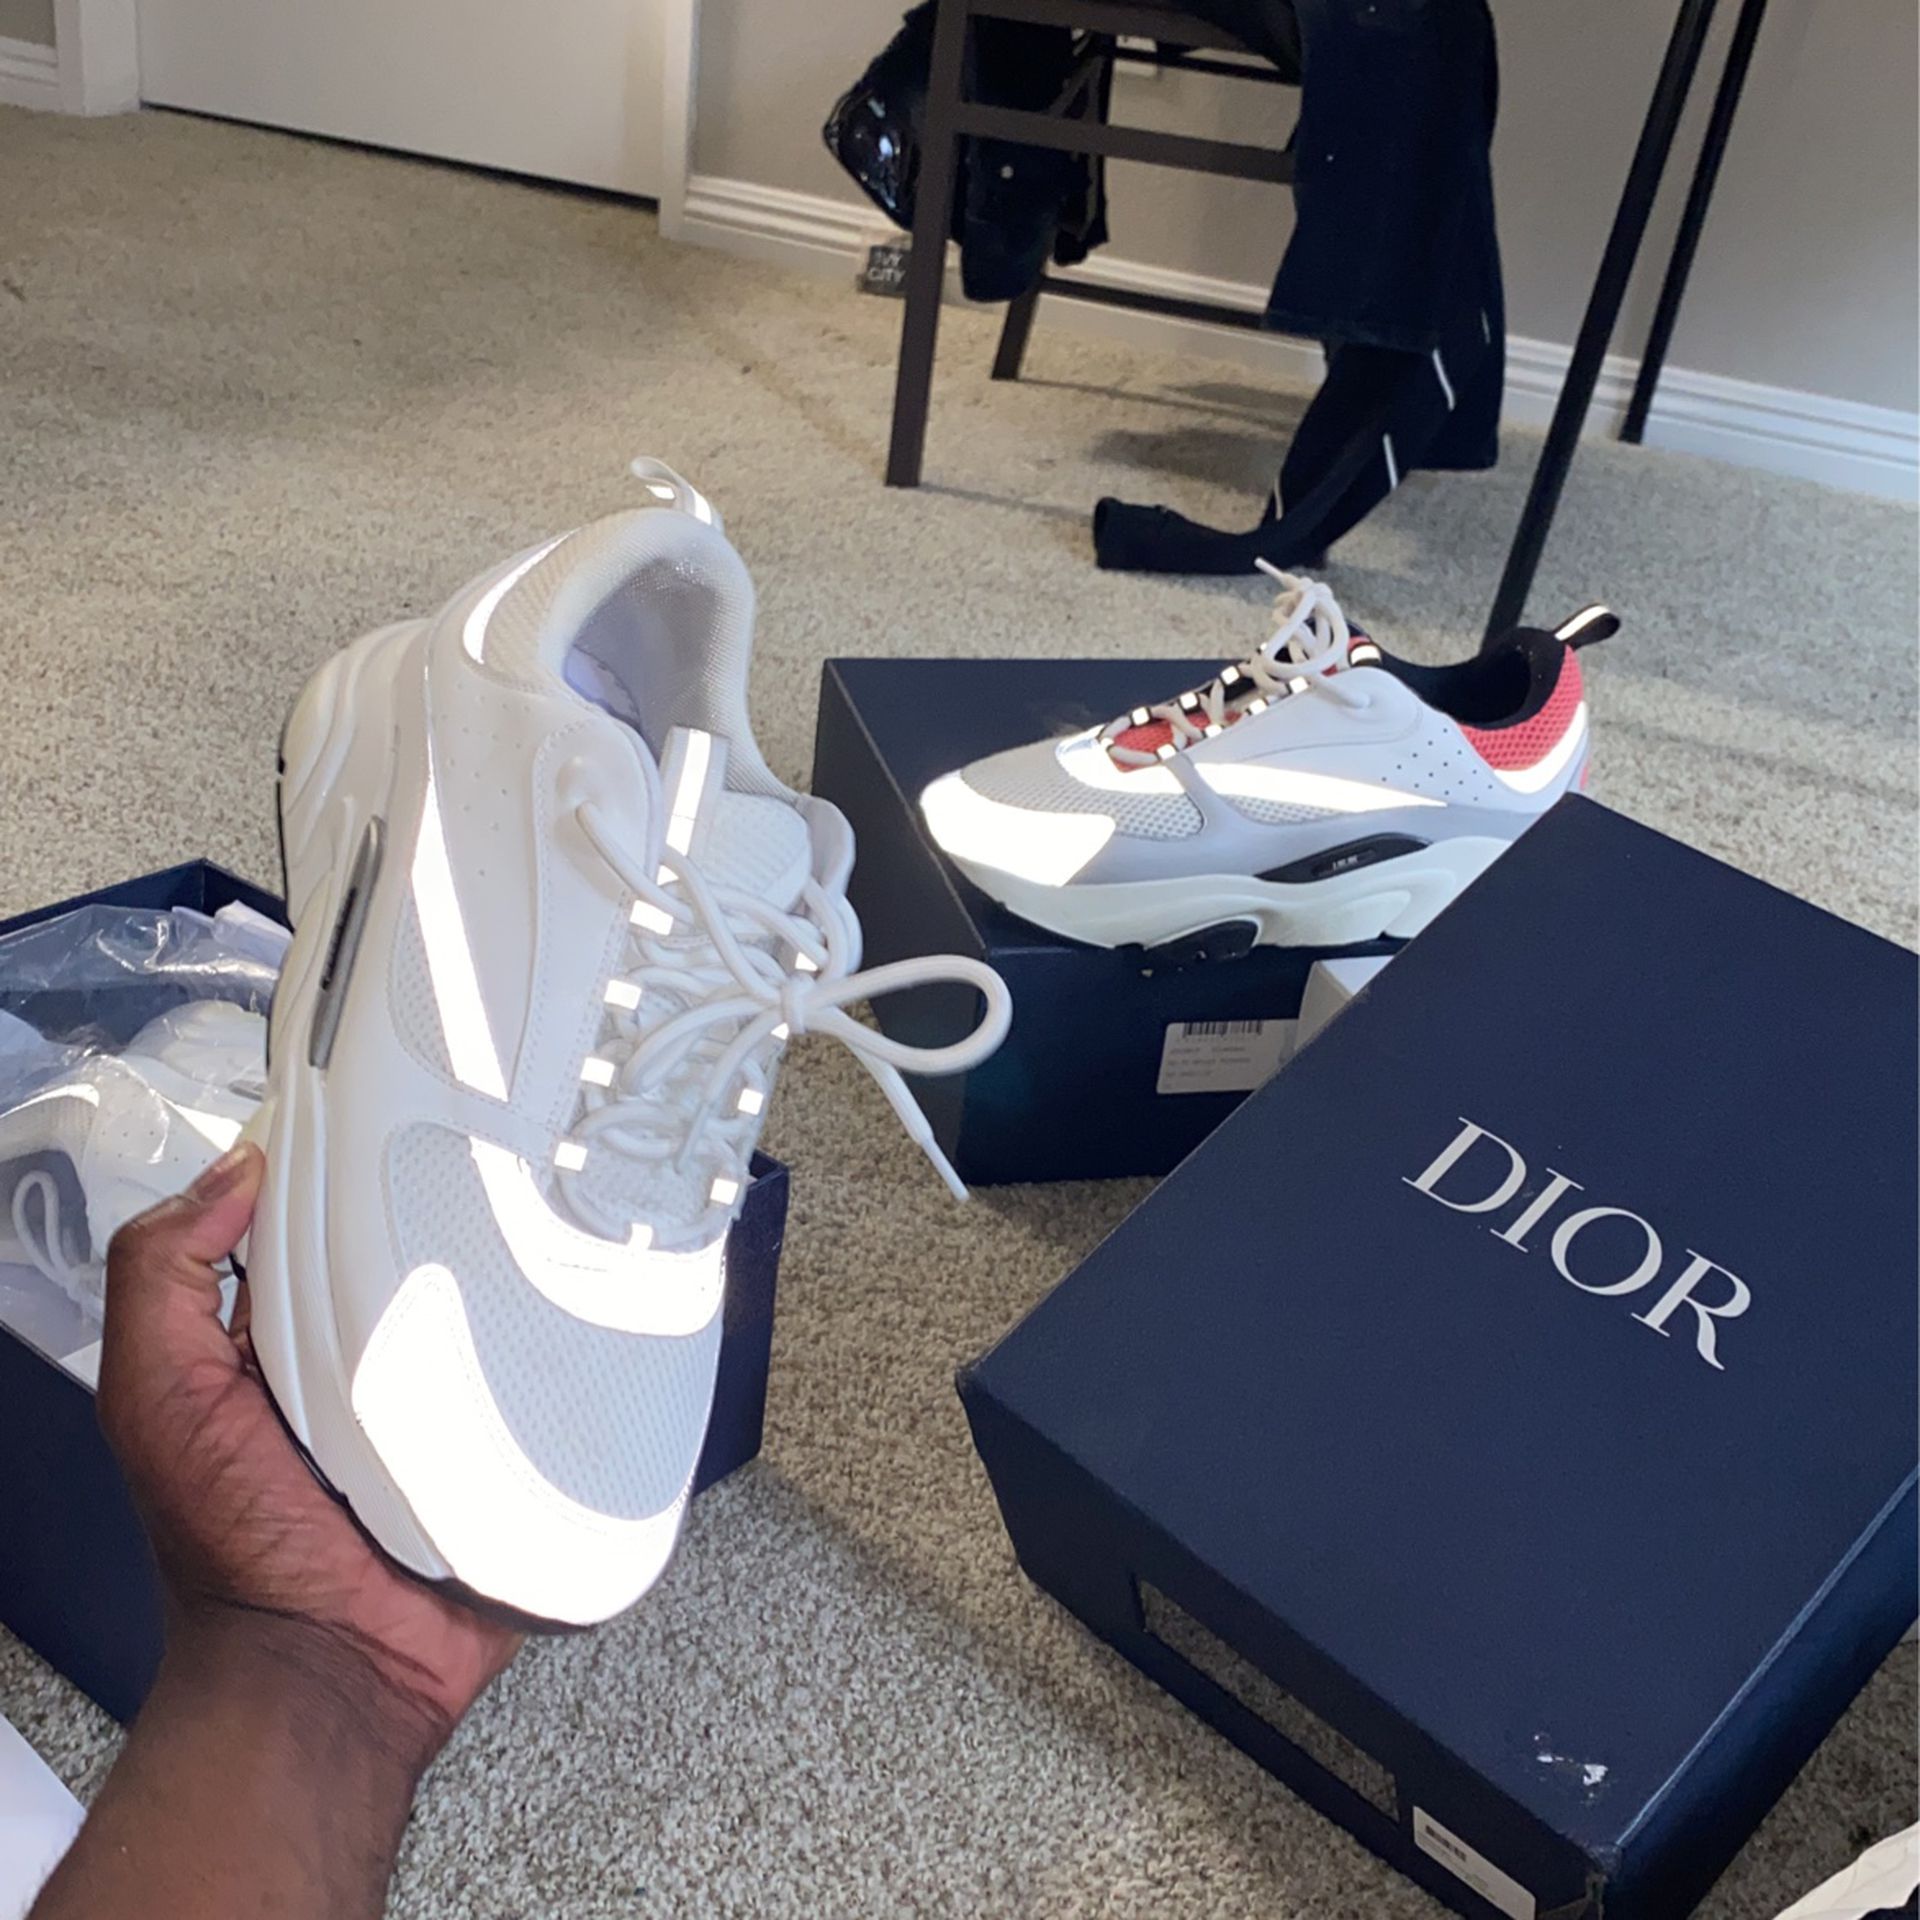 B22 Reflective Dior Shoes for Sale in Buckeye, AZ - OfferUp